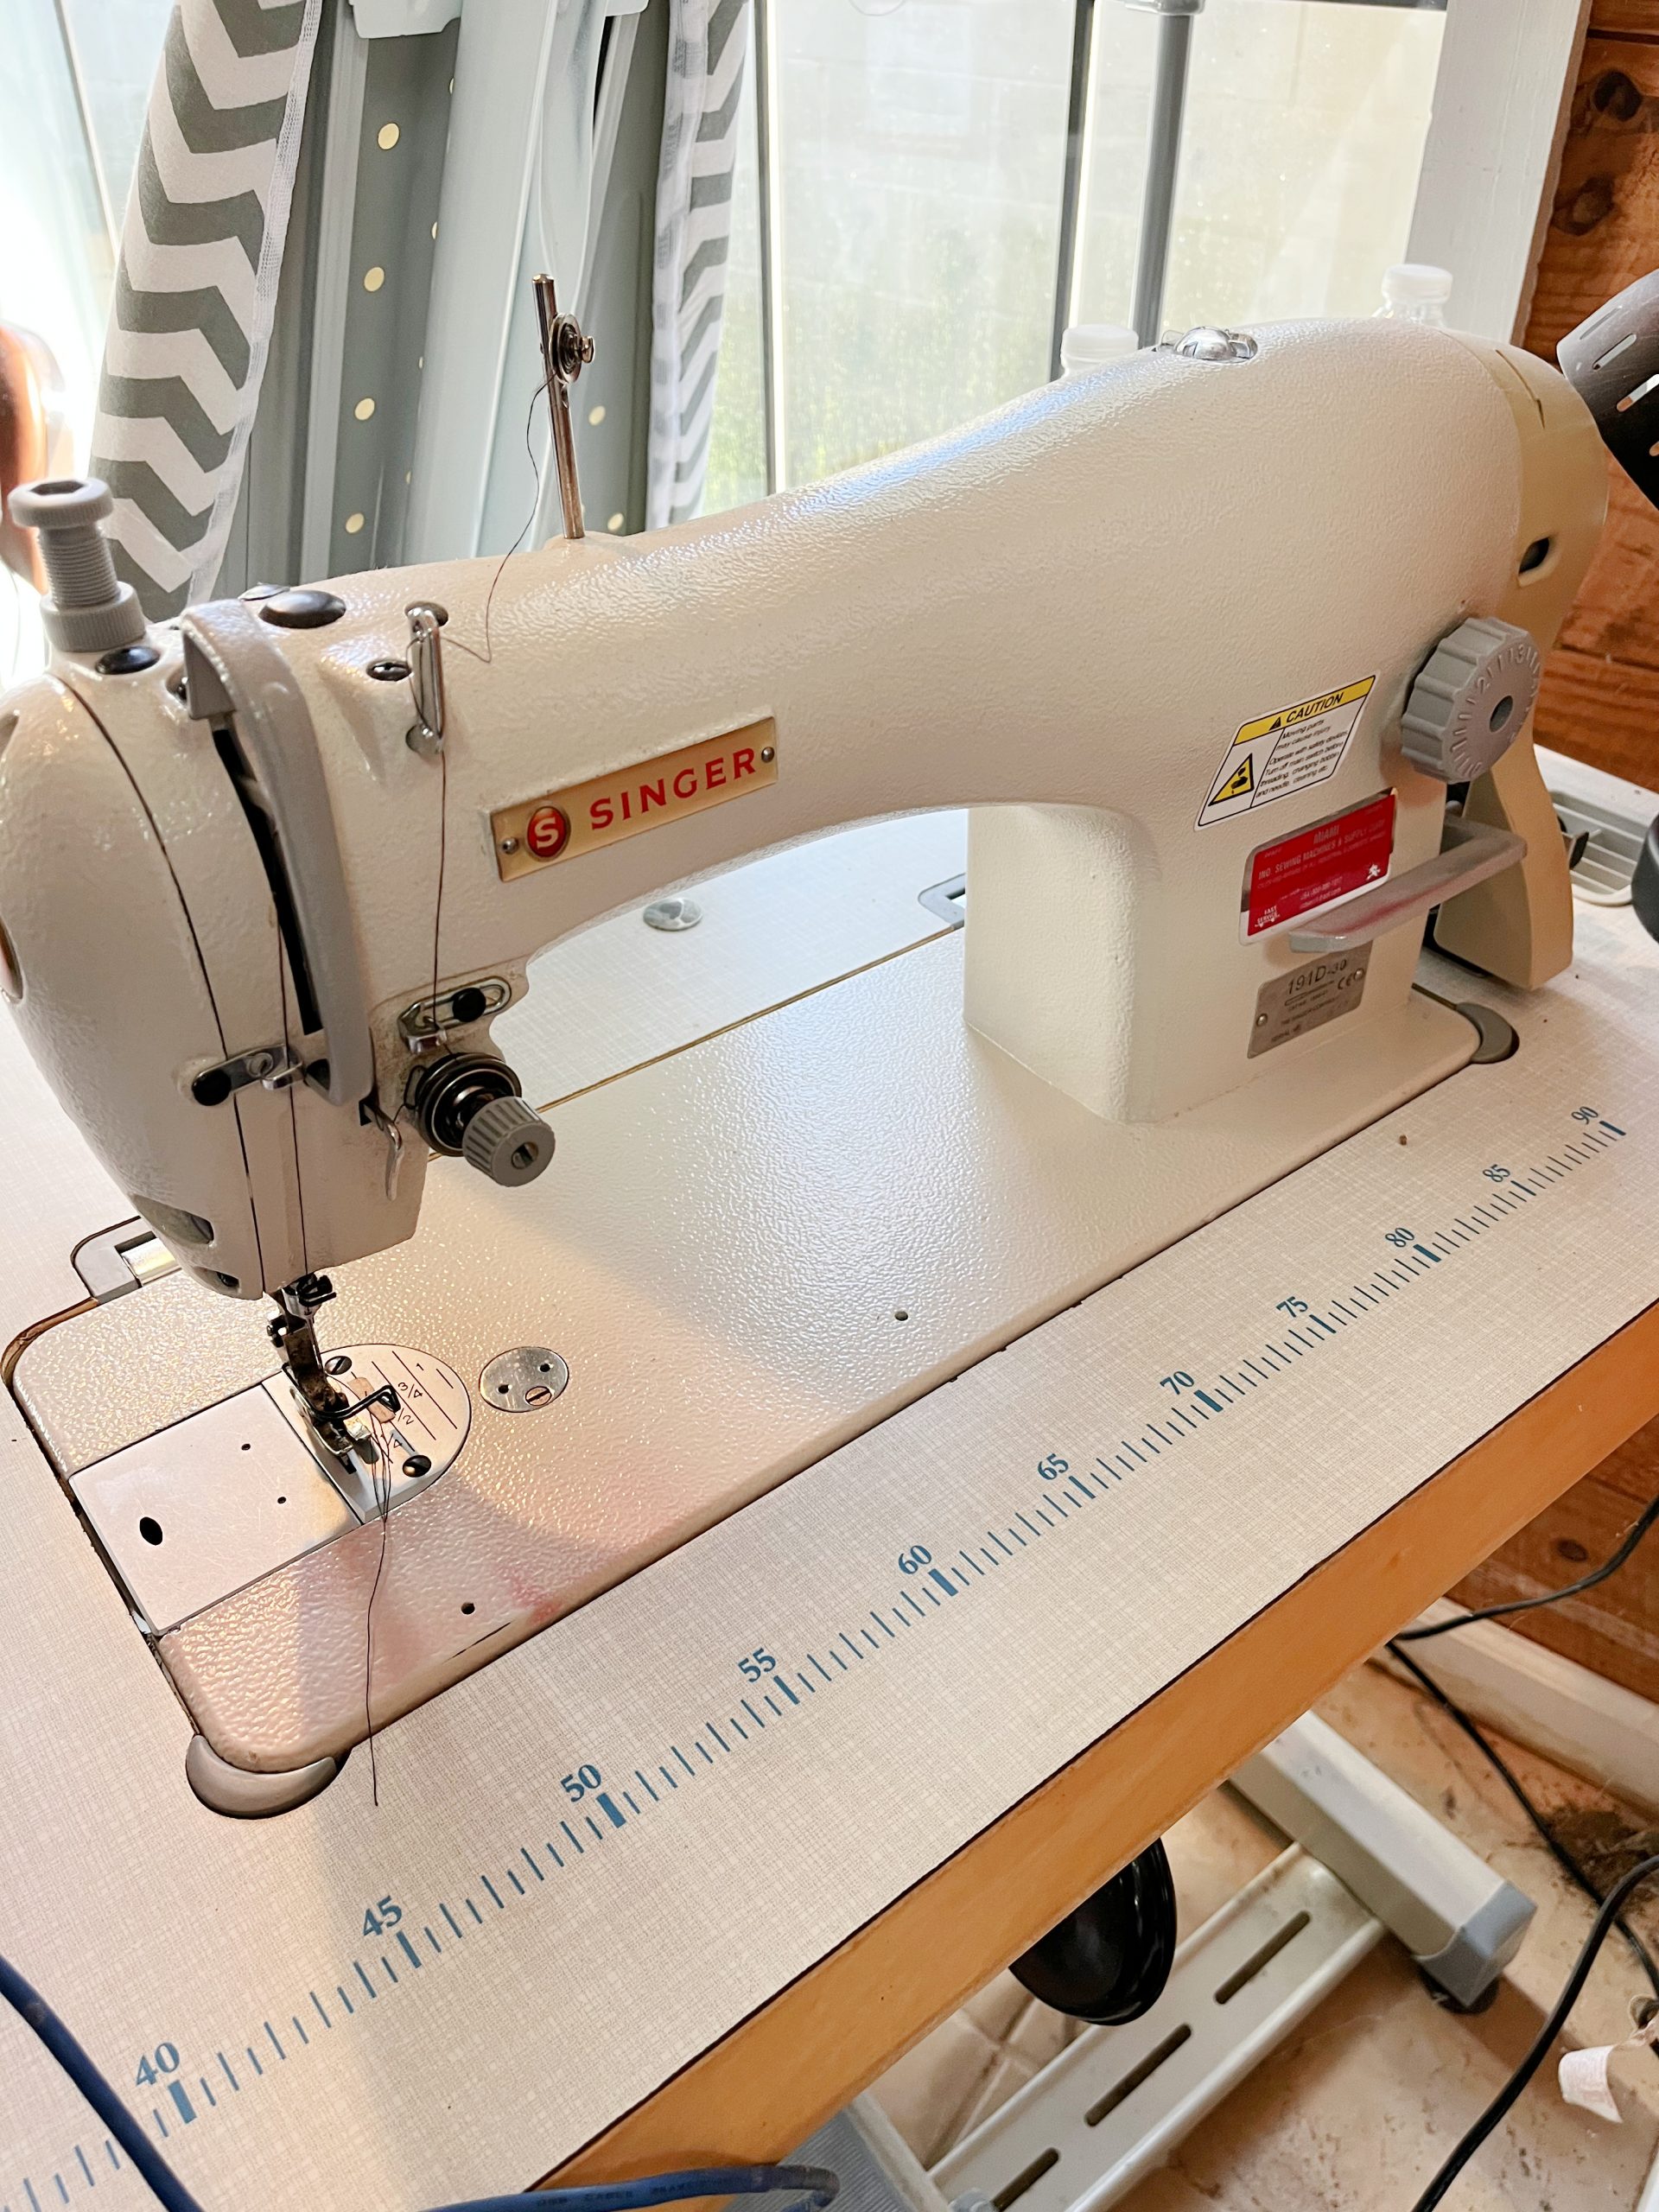 Equipment Lot: Industrial Sewing Machines, Large Industrial Cutting Table, Cloth Spreader & Fabric Knife (Used) Item # UE-031522A (Arkansas)